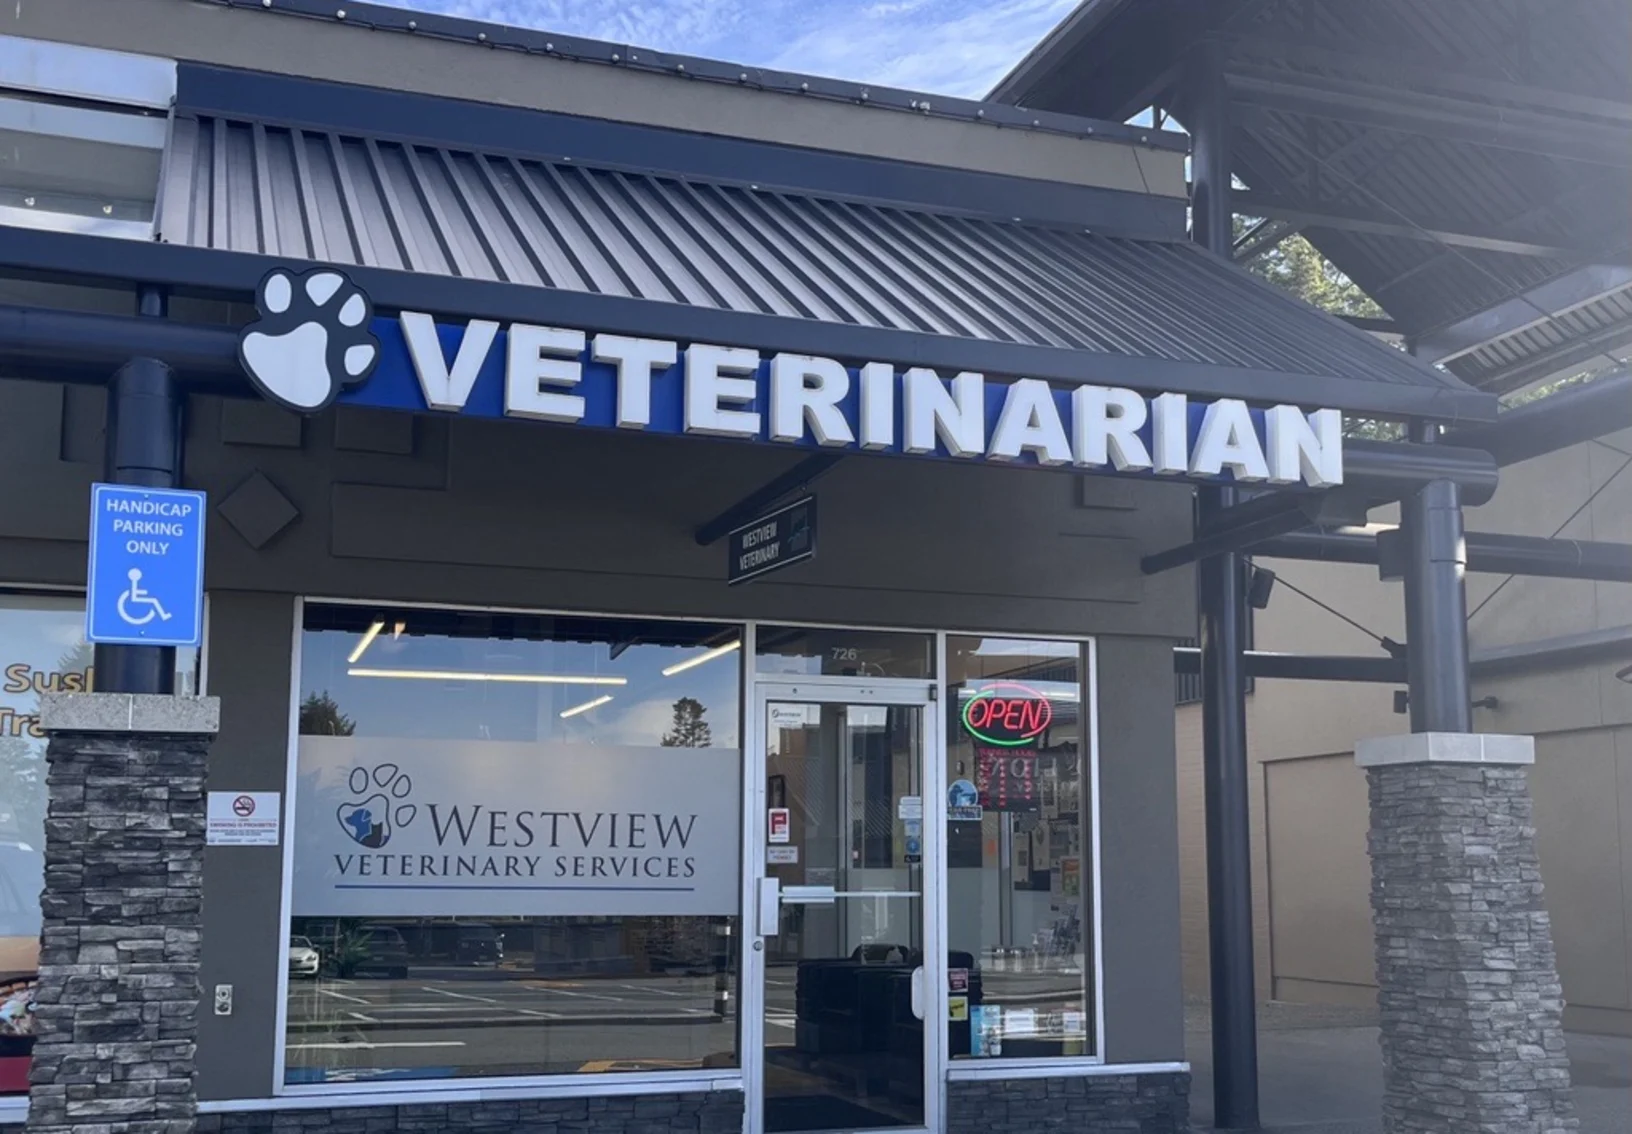 Exterior of Westview Veterinary Services